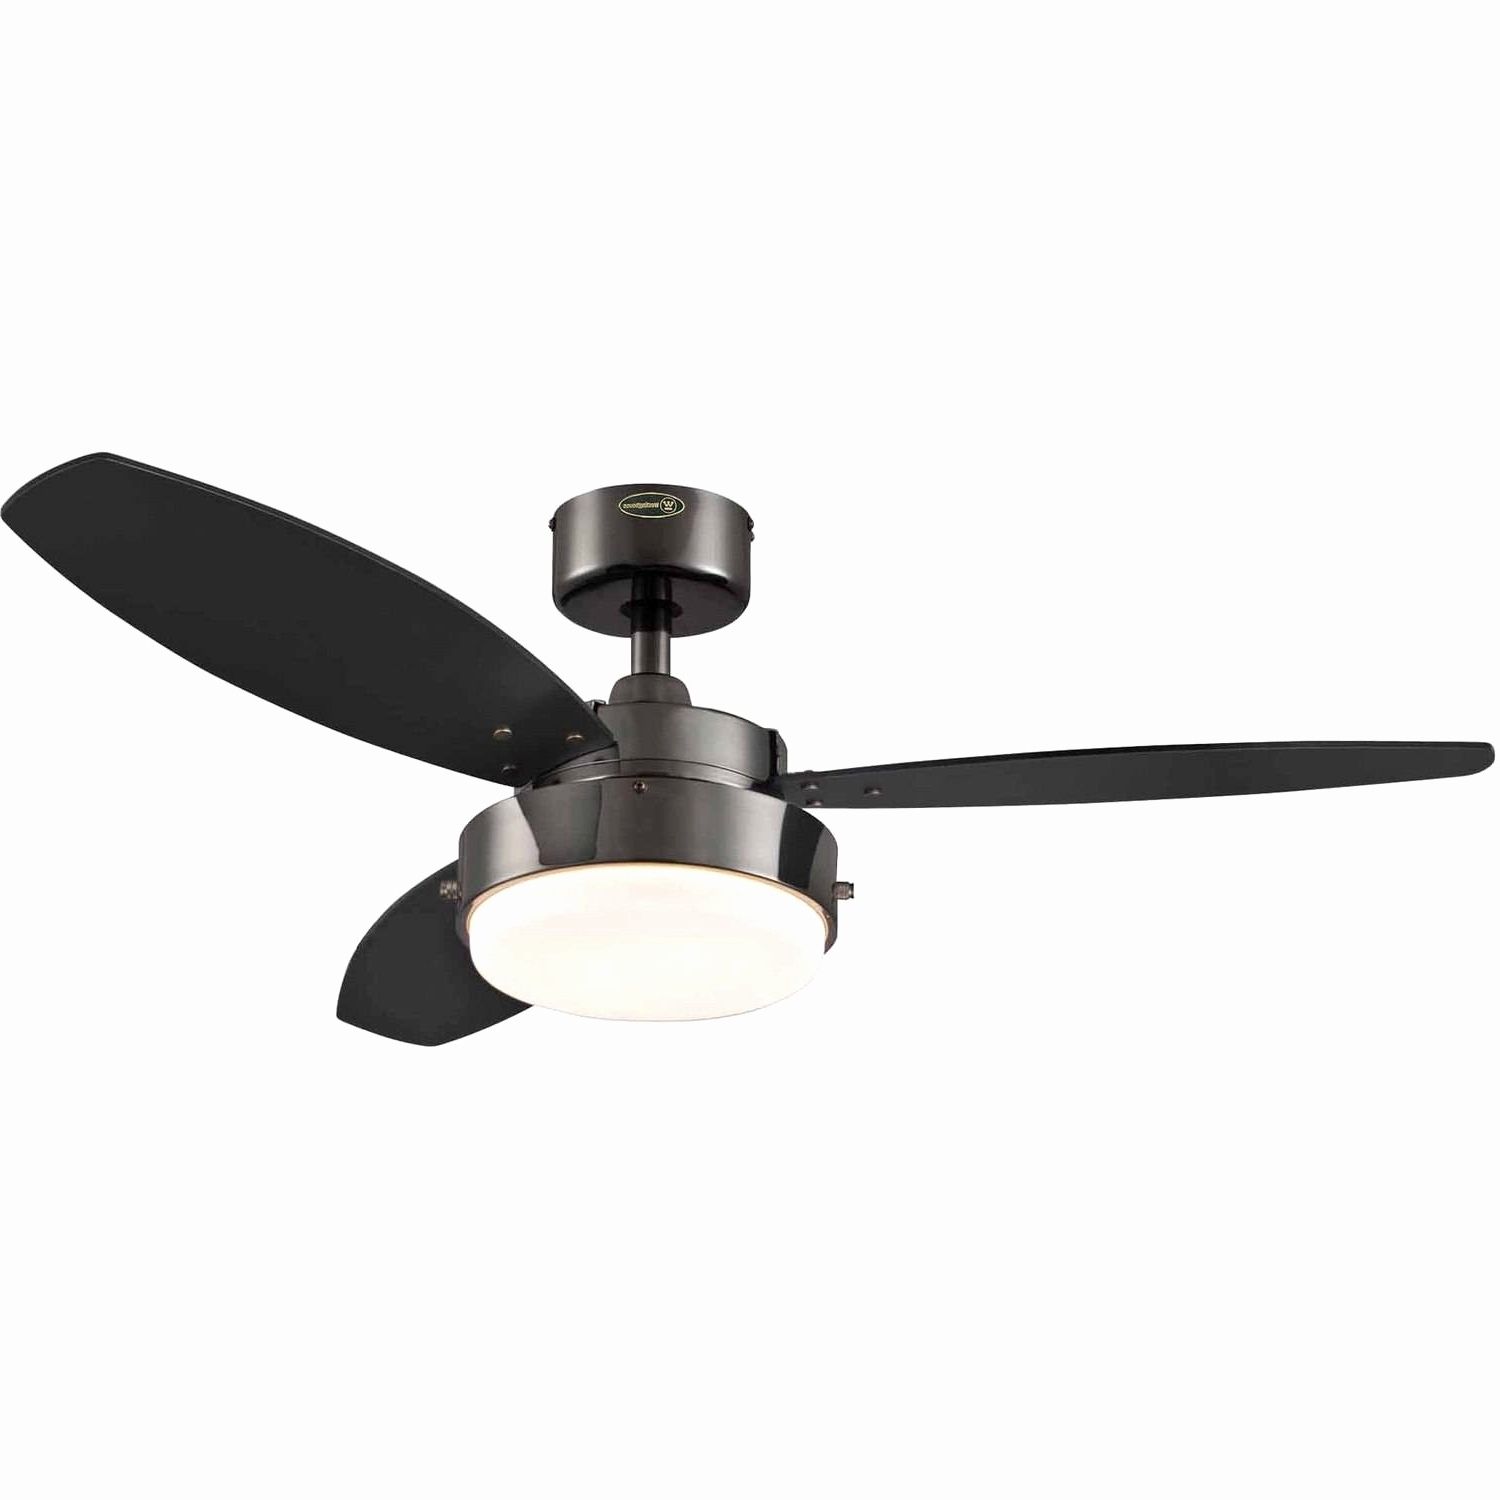 Outdoor Ceiling Fans With High Cfm With Fashionable 25 Luxury High Cfm Fan Image (View 15 of 20)